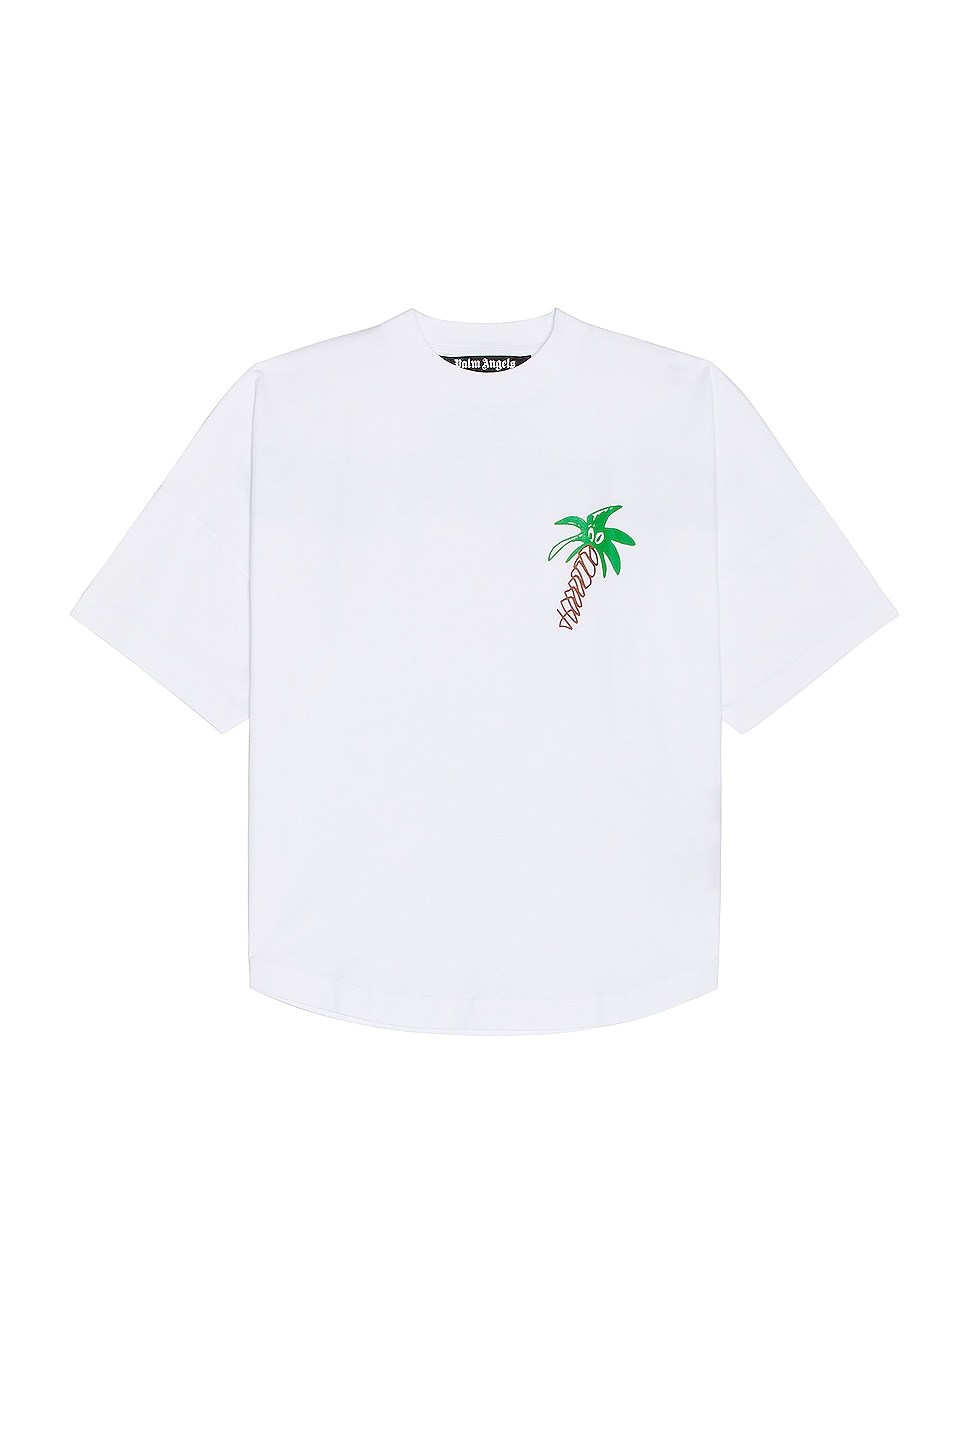 Image 1 of Palm Angels Sketchy Over Tee in White & Black